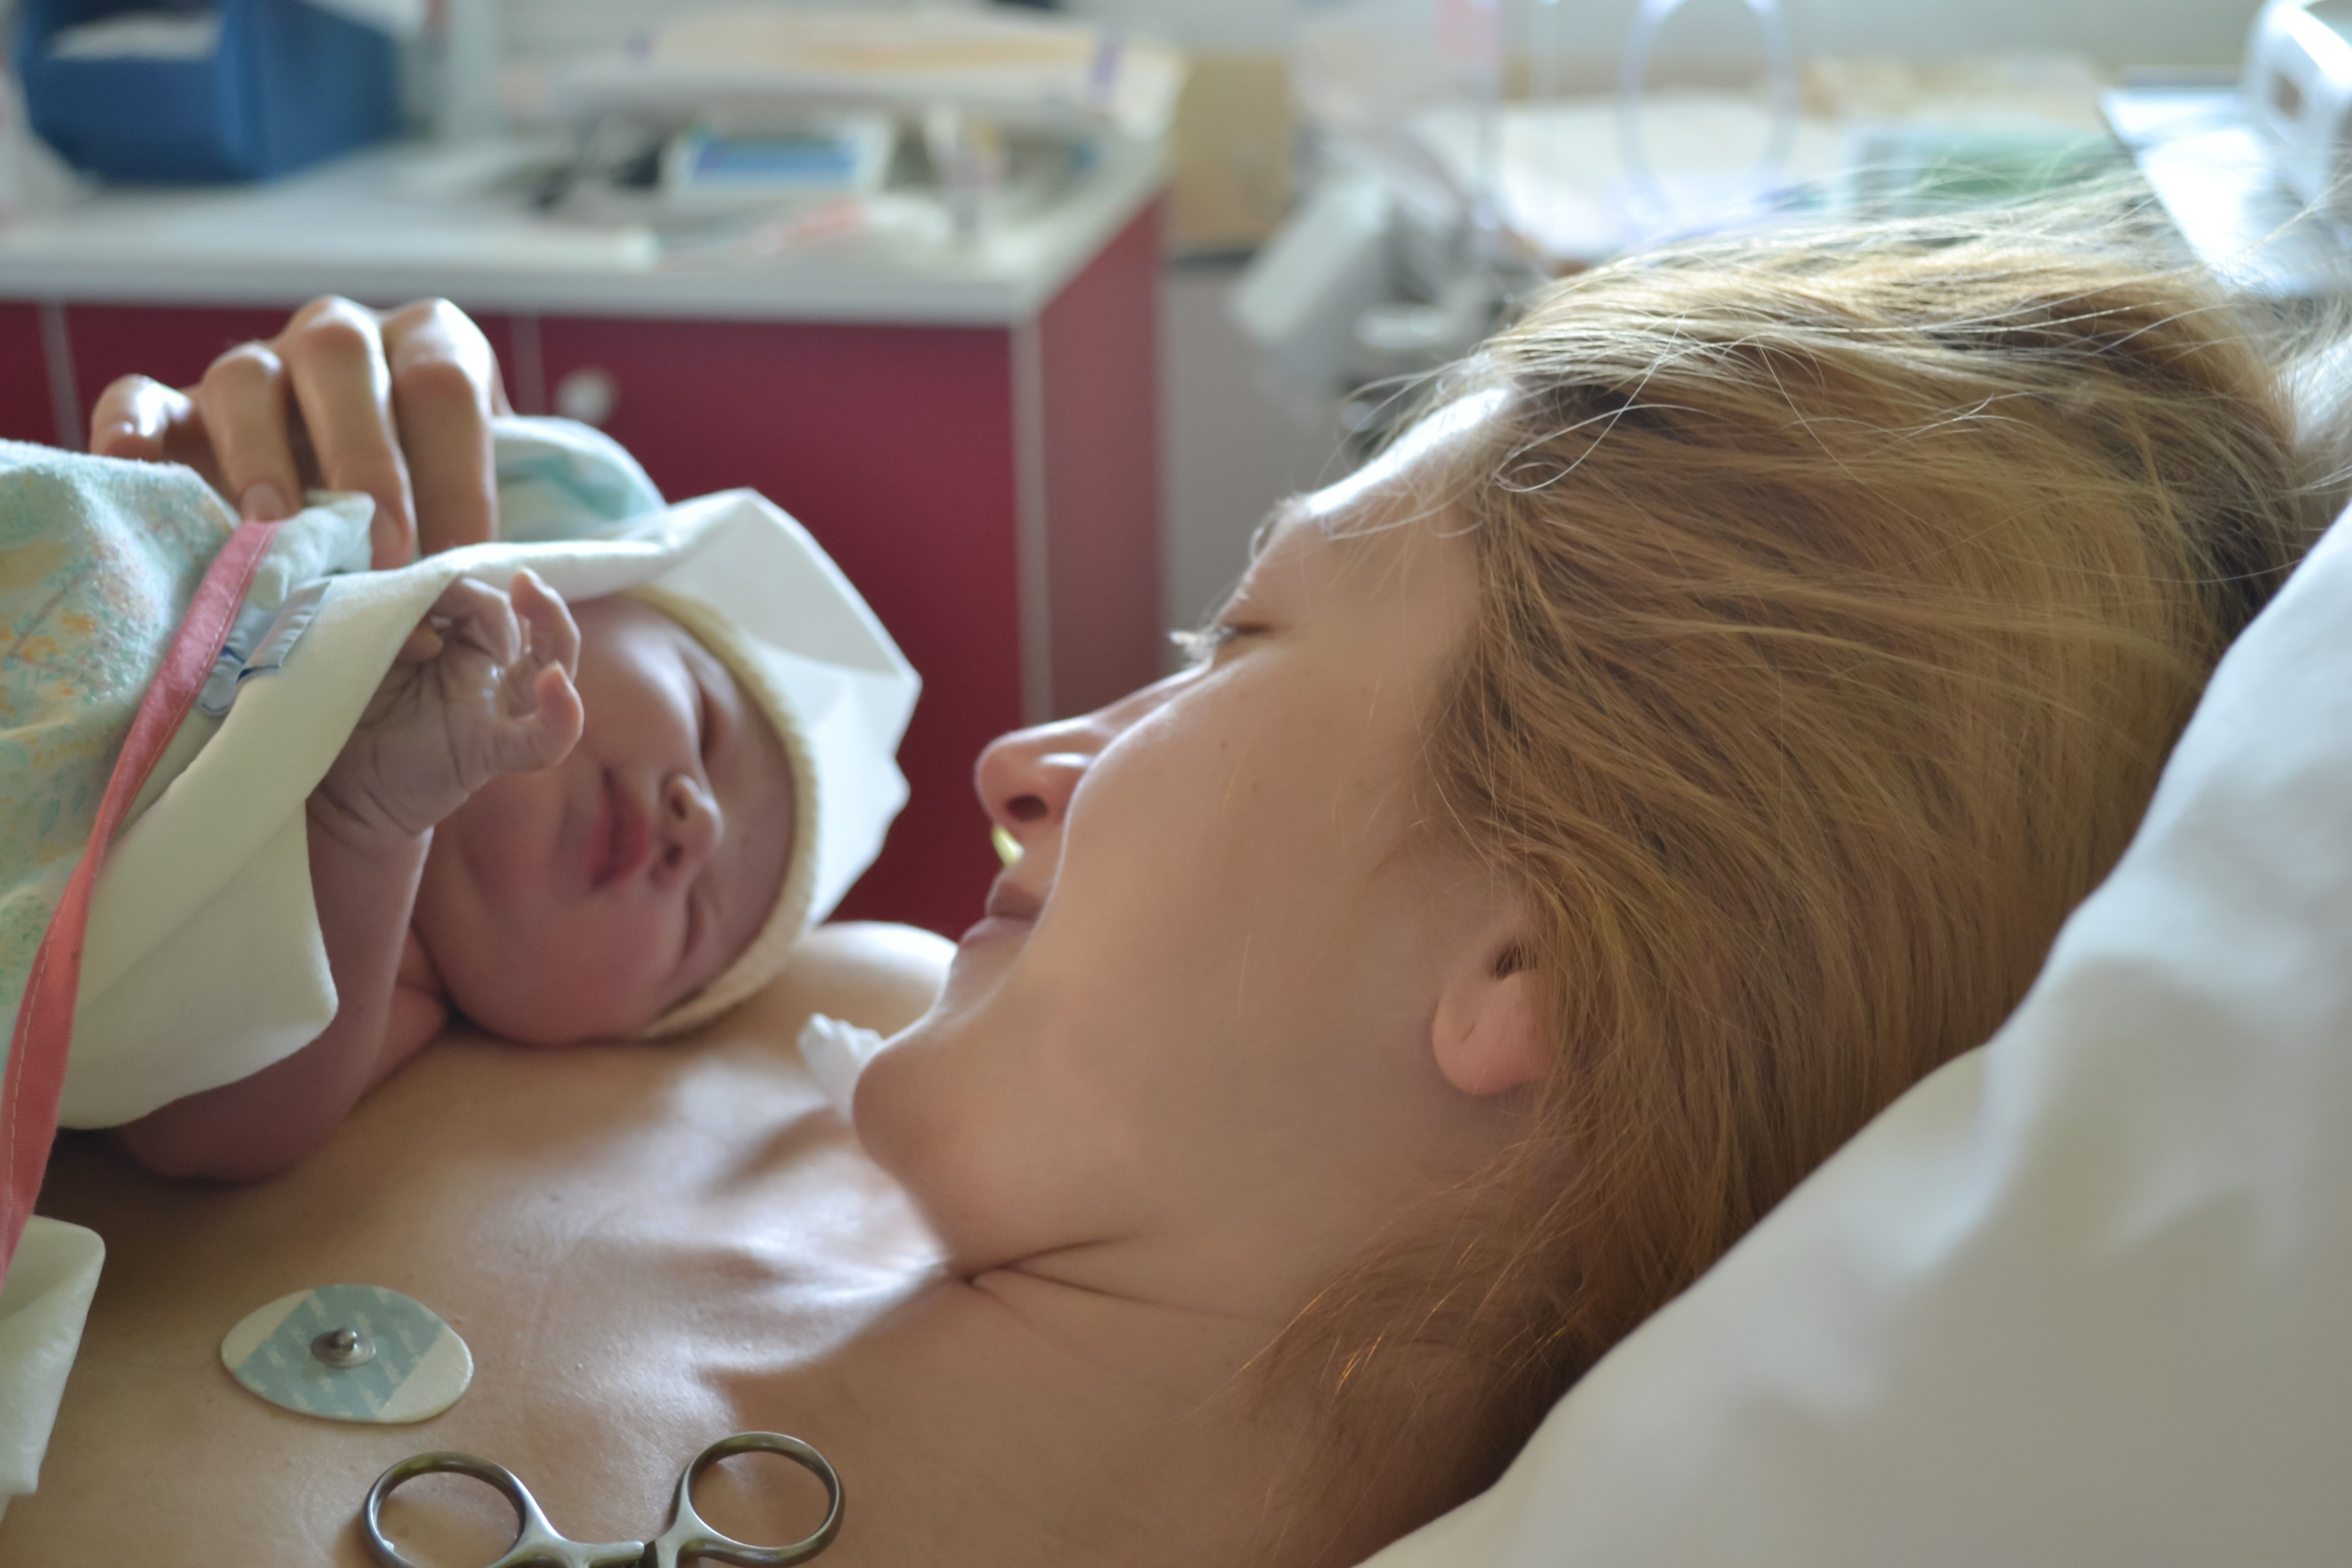 The millennial mother: 3 tips for labor & delivery